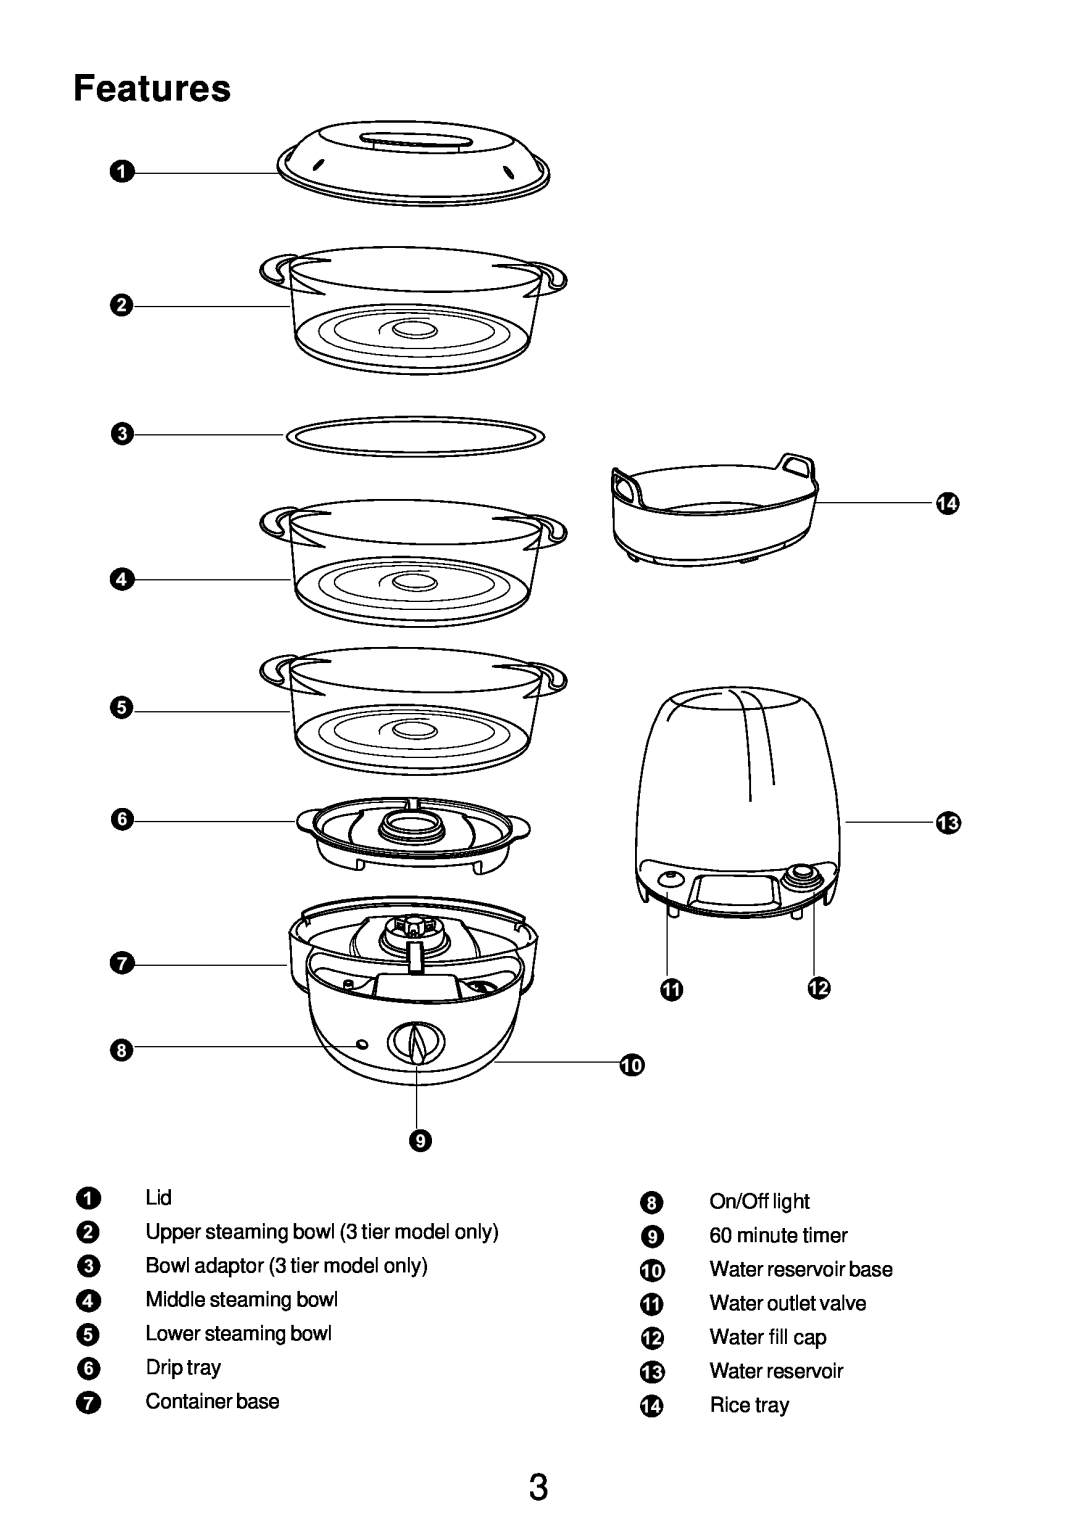 Morphy Richards Electric Steamer manual Features, Upper steaming bowl 3 tier model only Bowl adaptor 3 tier model only 